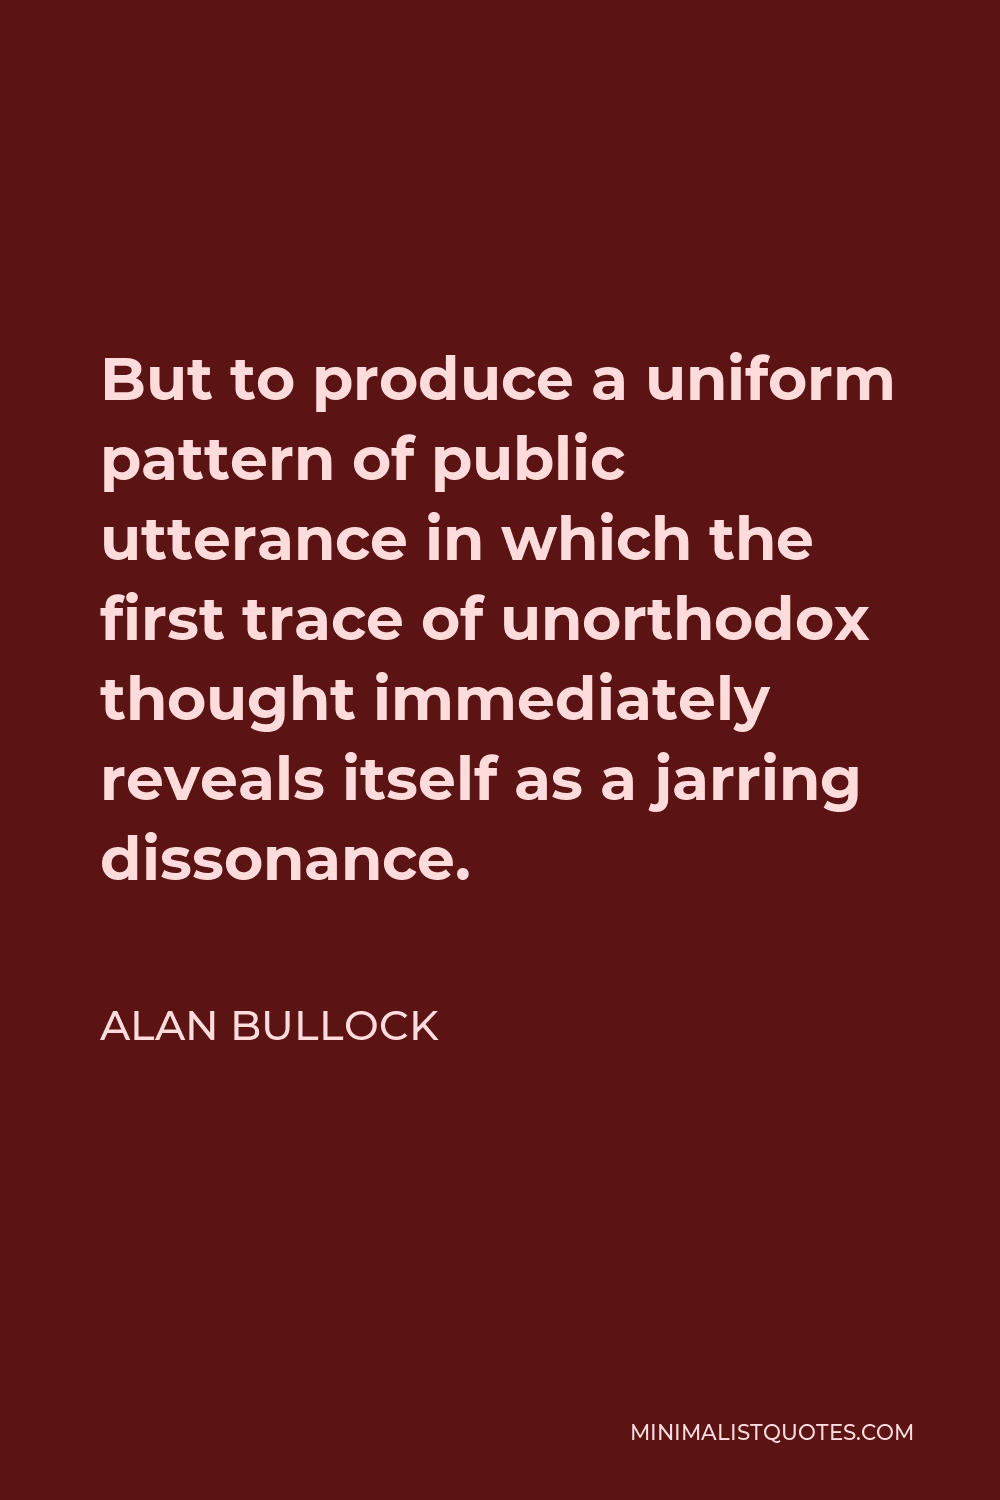 Alan Bullock Quote - But to produce a uniform pattern of public utterance in which the first trace of unorthodox thought immediately reveals itself as a jarring dissonance.